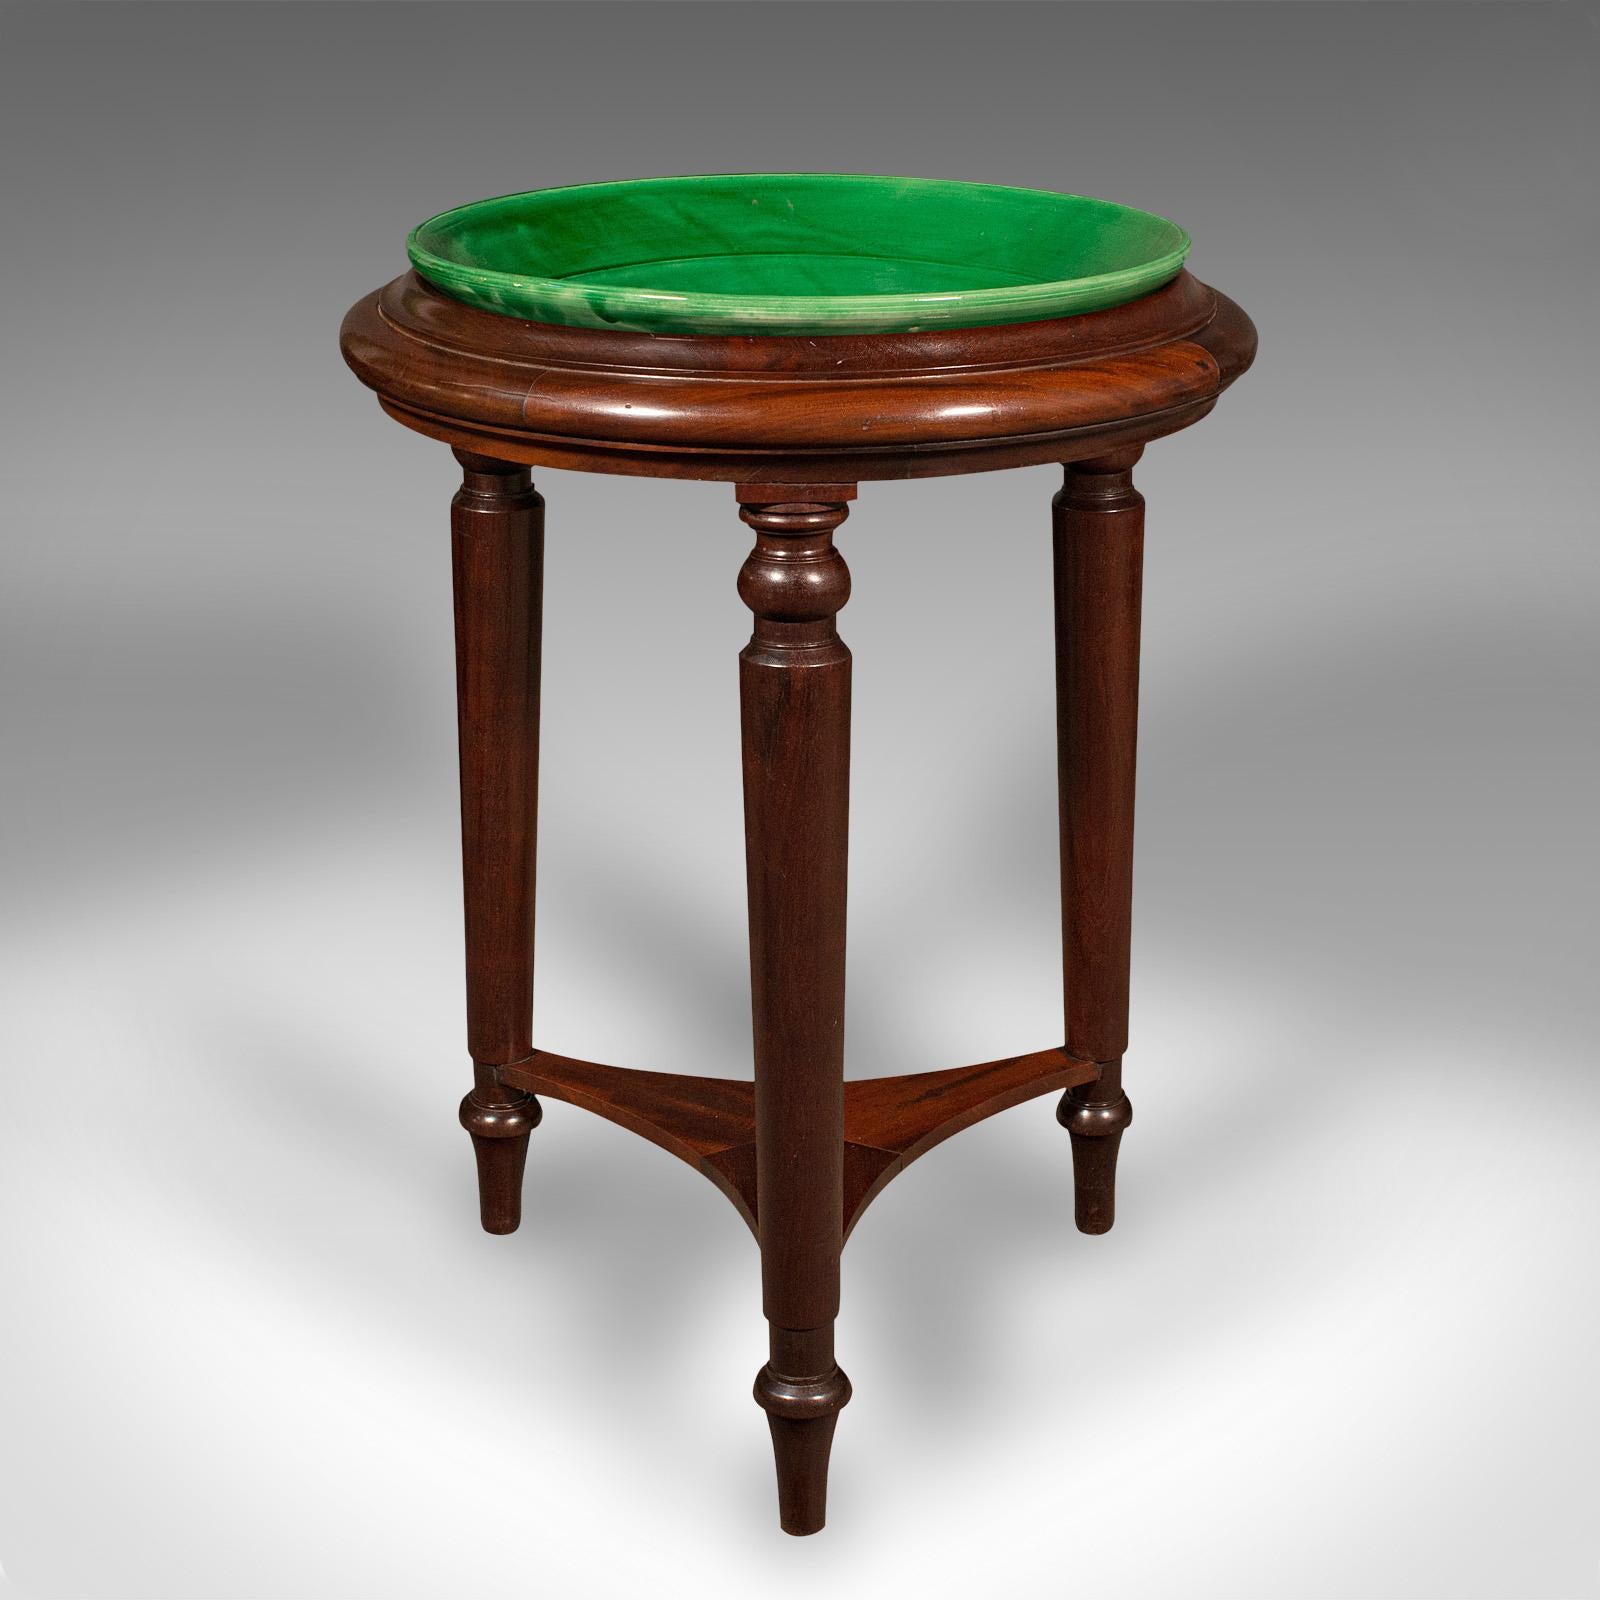 This is an antique decorative wash stand. An English, mahogany and ceramic jardiniere or planter frame, dating to the Regency period and later, circa 1820.

Charismatic and versatile with superb colour for decorative appeal
Displays a desirable